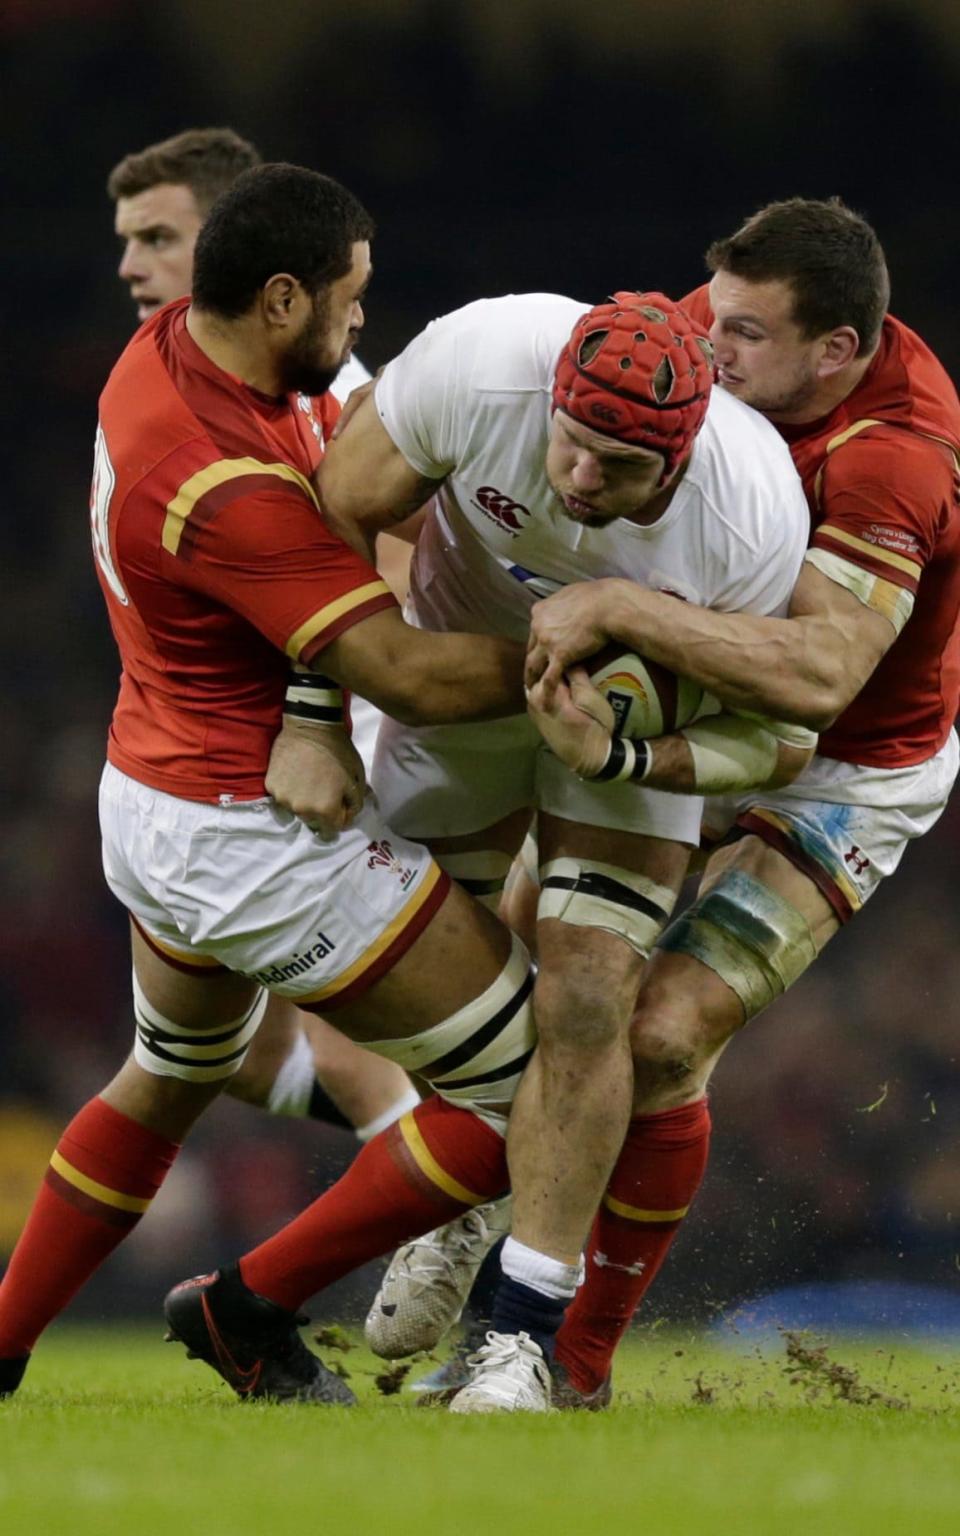 Wales 16 England 21: Elliot Daly scores try at the death to extend winning run to 16 after titanic struggle in Cardiff